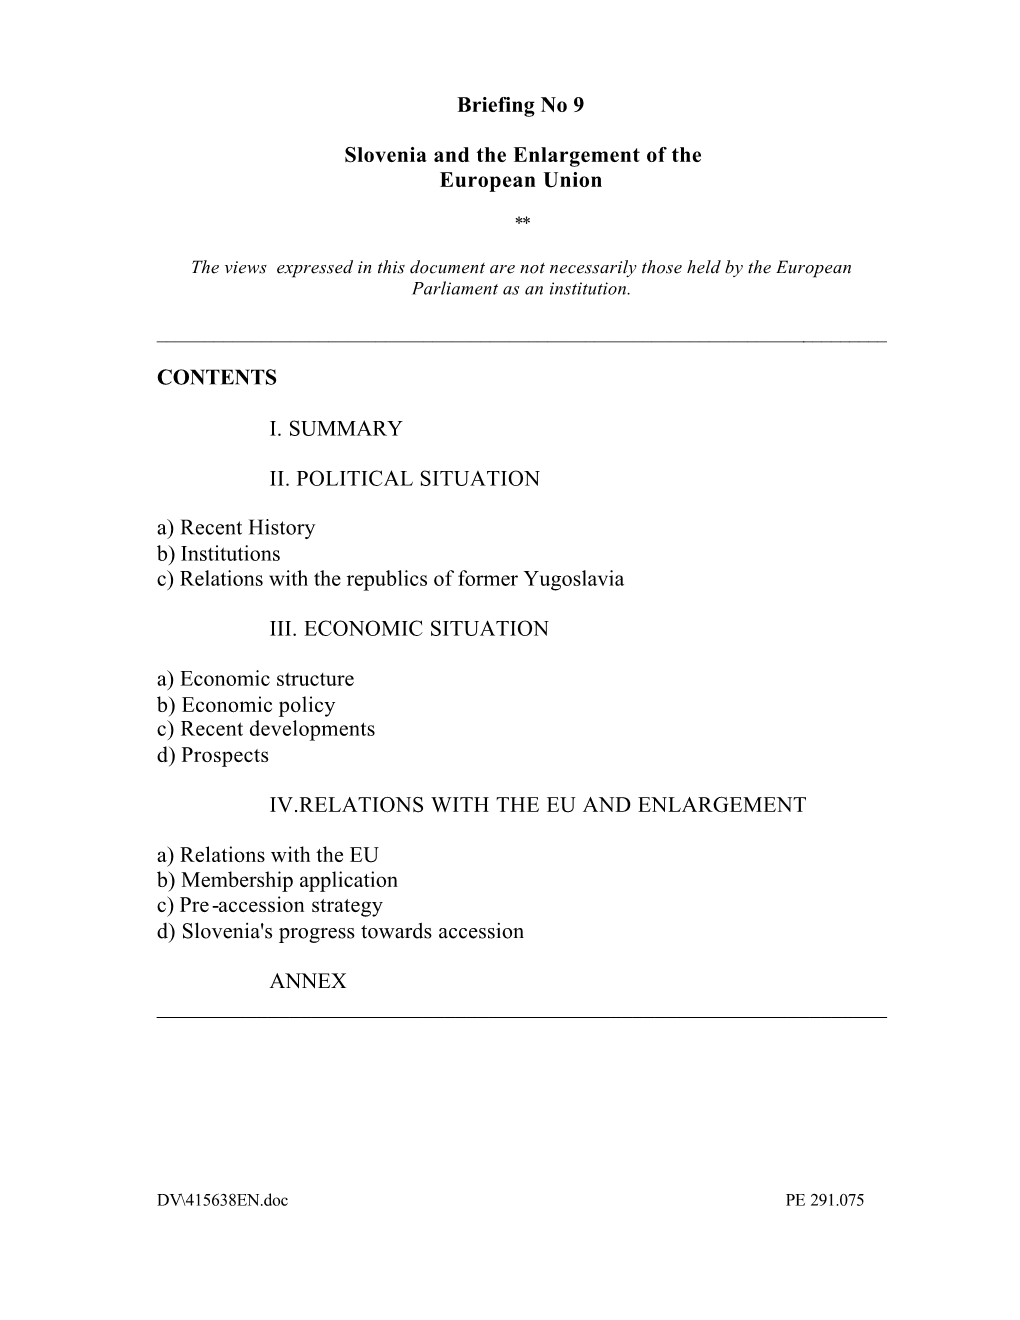 Briefing No 9 Slovenia and the Enlargement of the European Union CONTENTS I. SUMMARY II. POLITICAL SITUATION A) Recent History